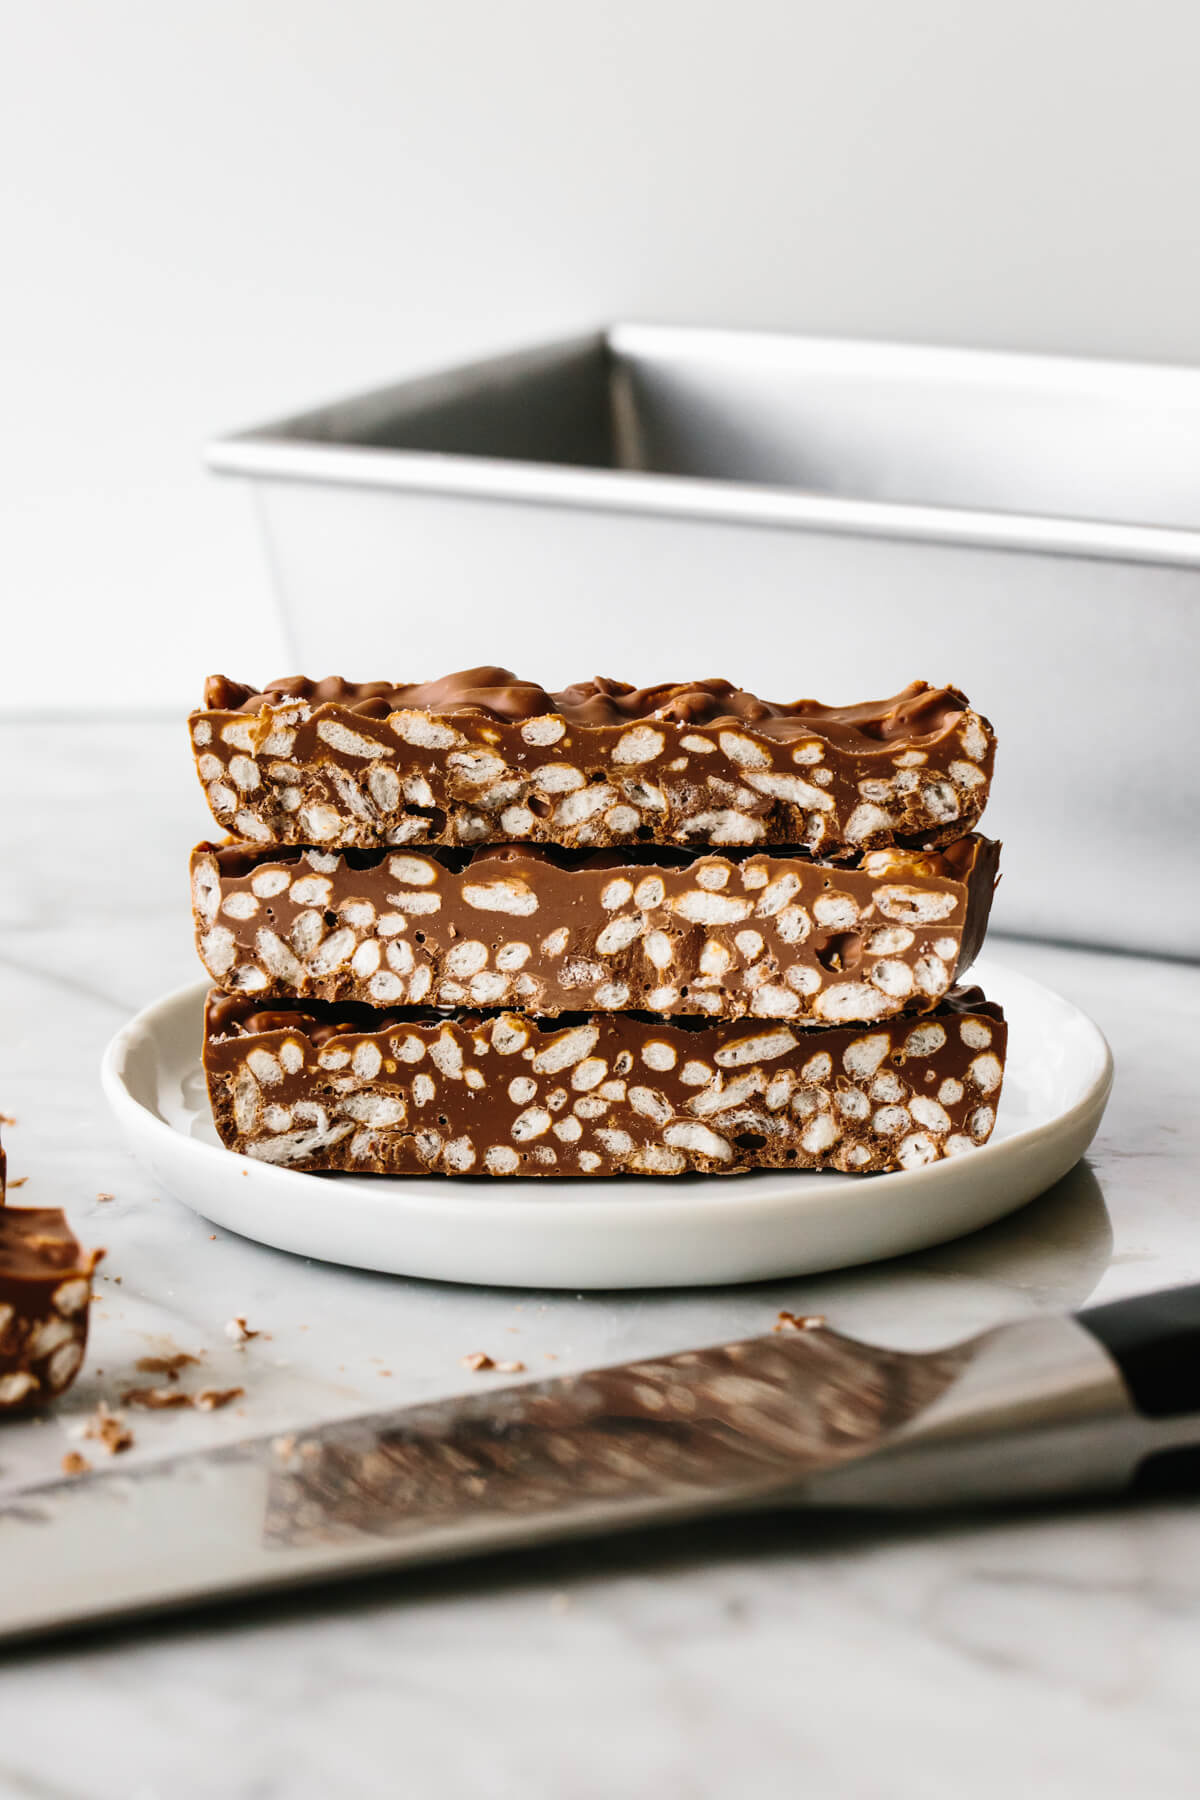 Chocolate crunch bars piled on each other on a plate.